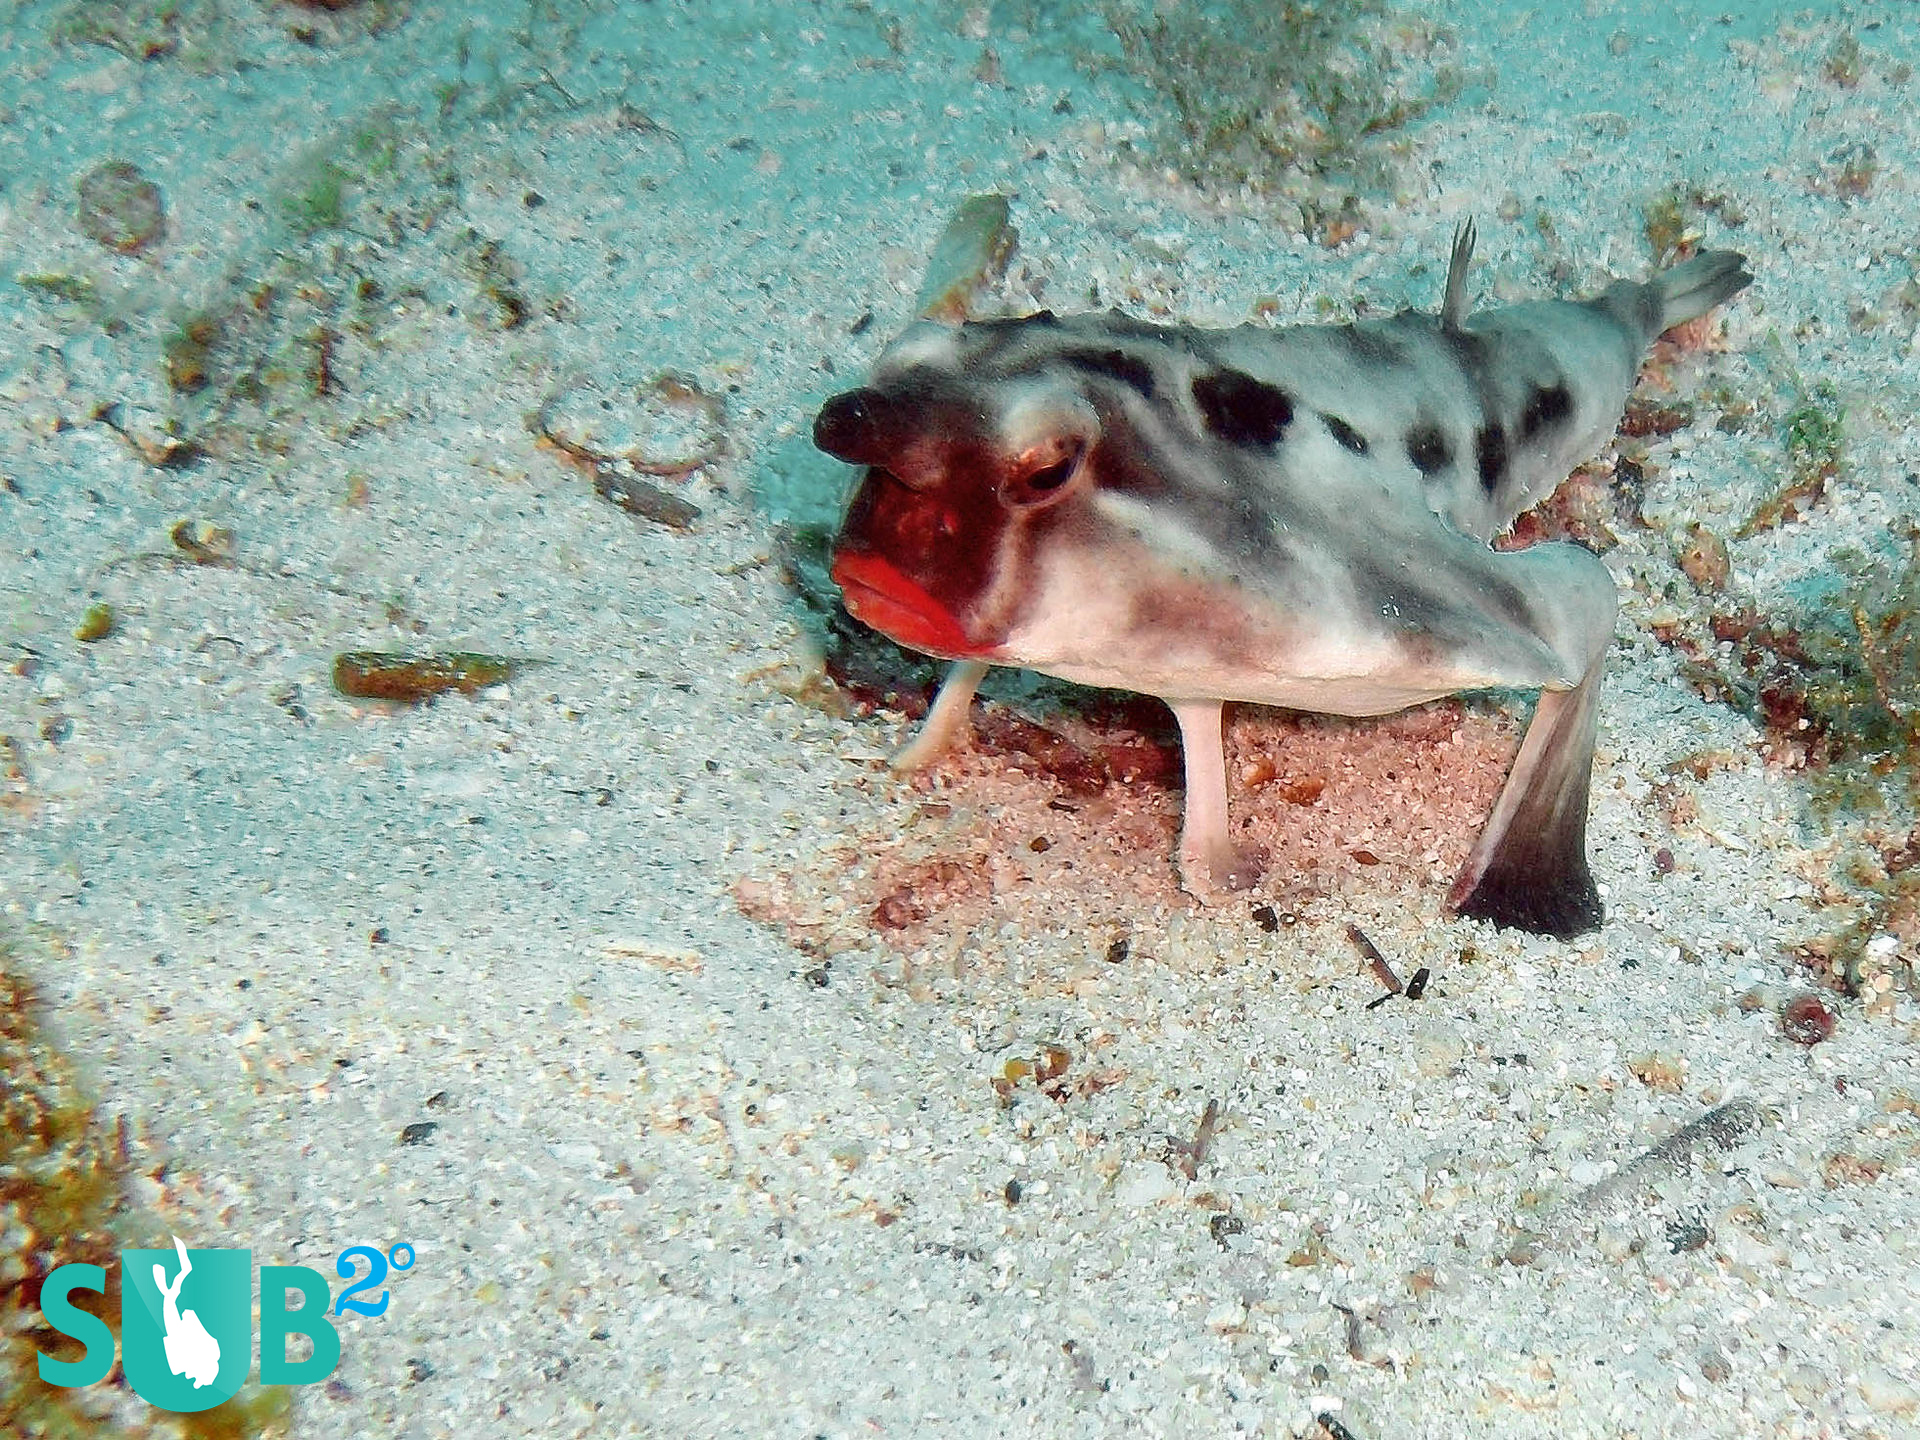 The red-lipped batfish (Ogcocephalus darwini) has to be one of the most bizarre fish a diver can hope to see. With eyes on the ends of short stalks and mouth the color of freshly applied lipstick, this fish has a truly alien physique.